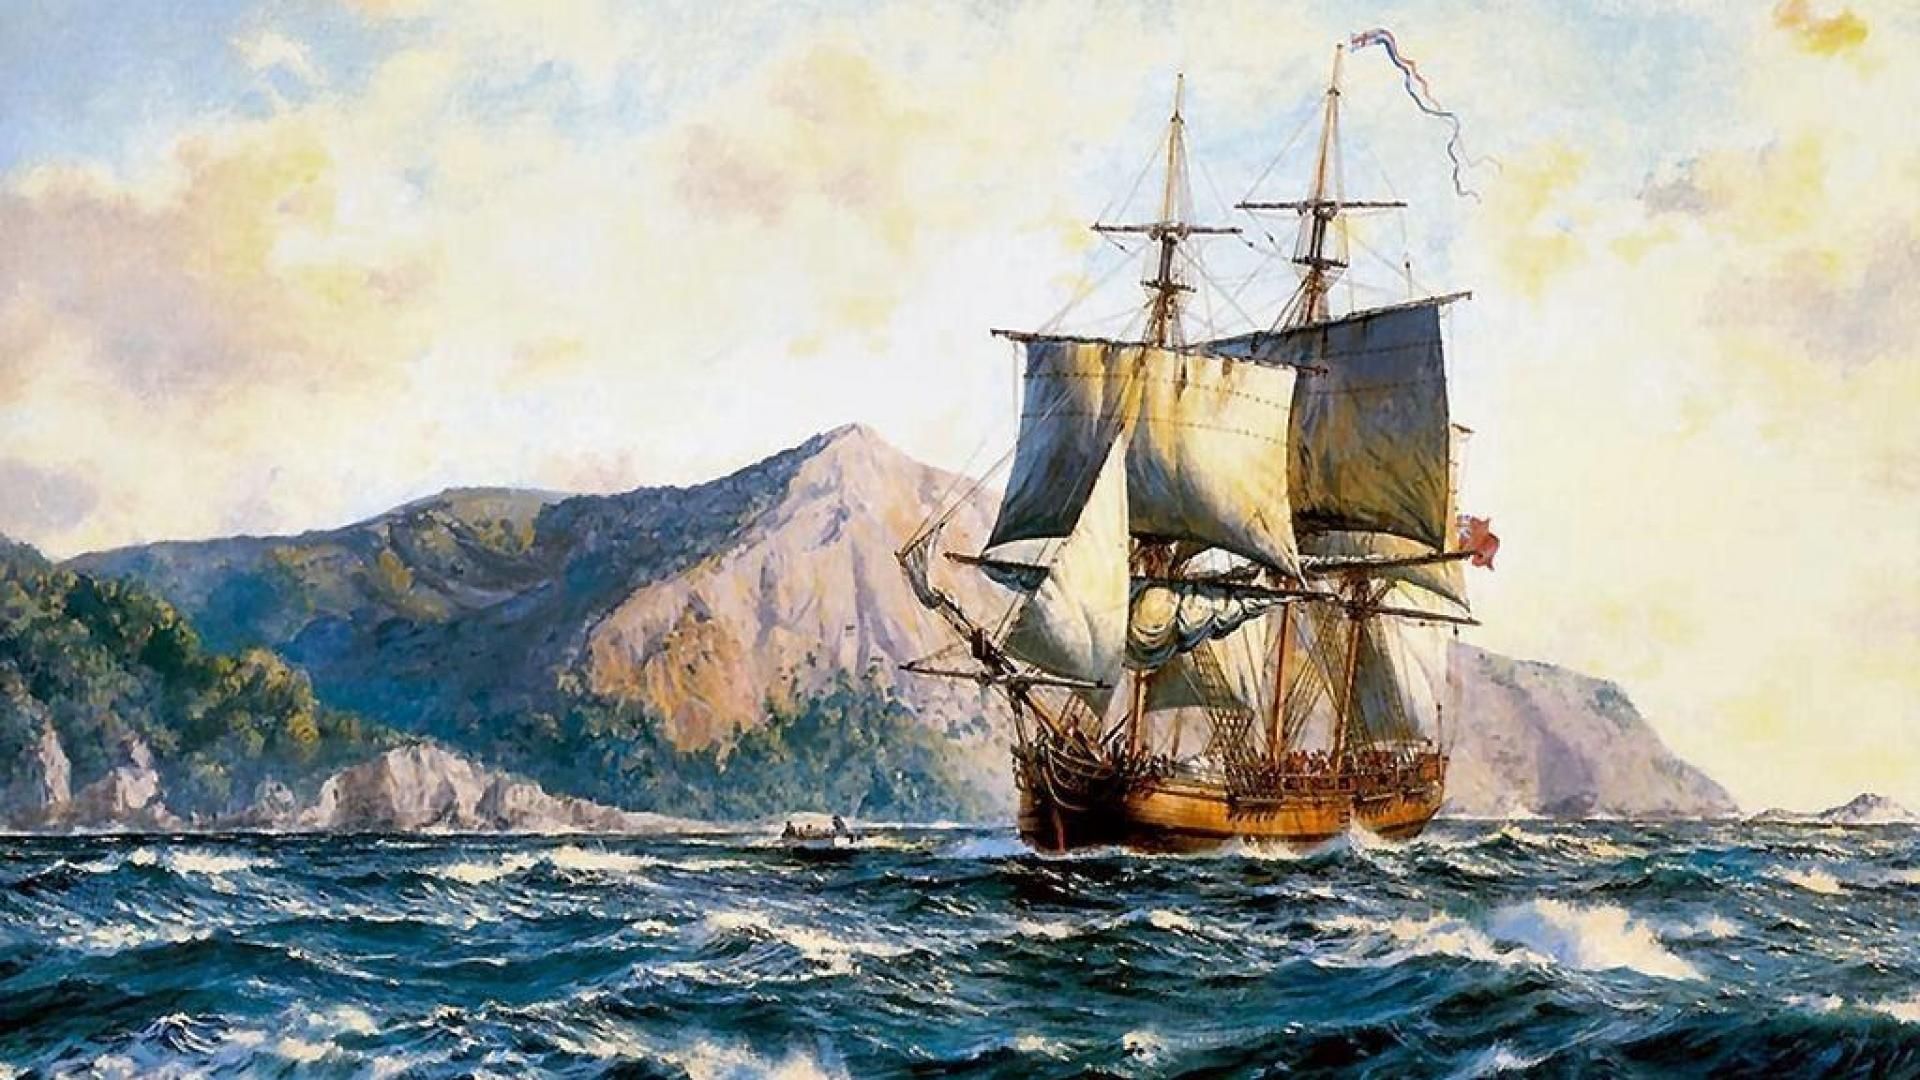 Ship Painting Wallpaper Free Ship Painting Background